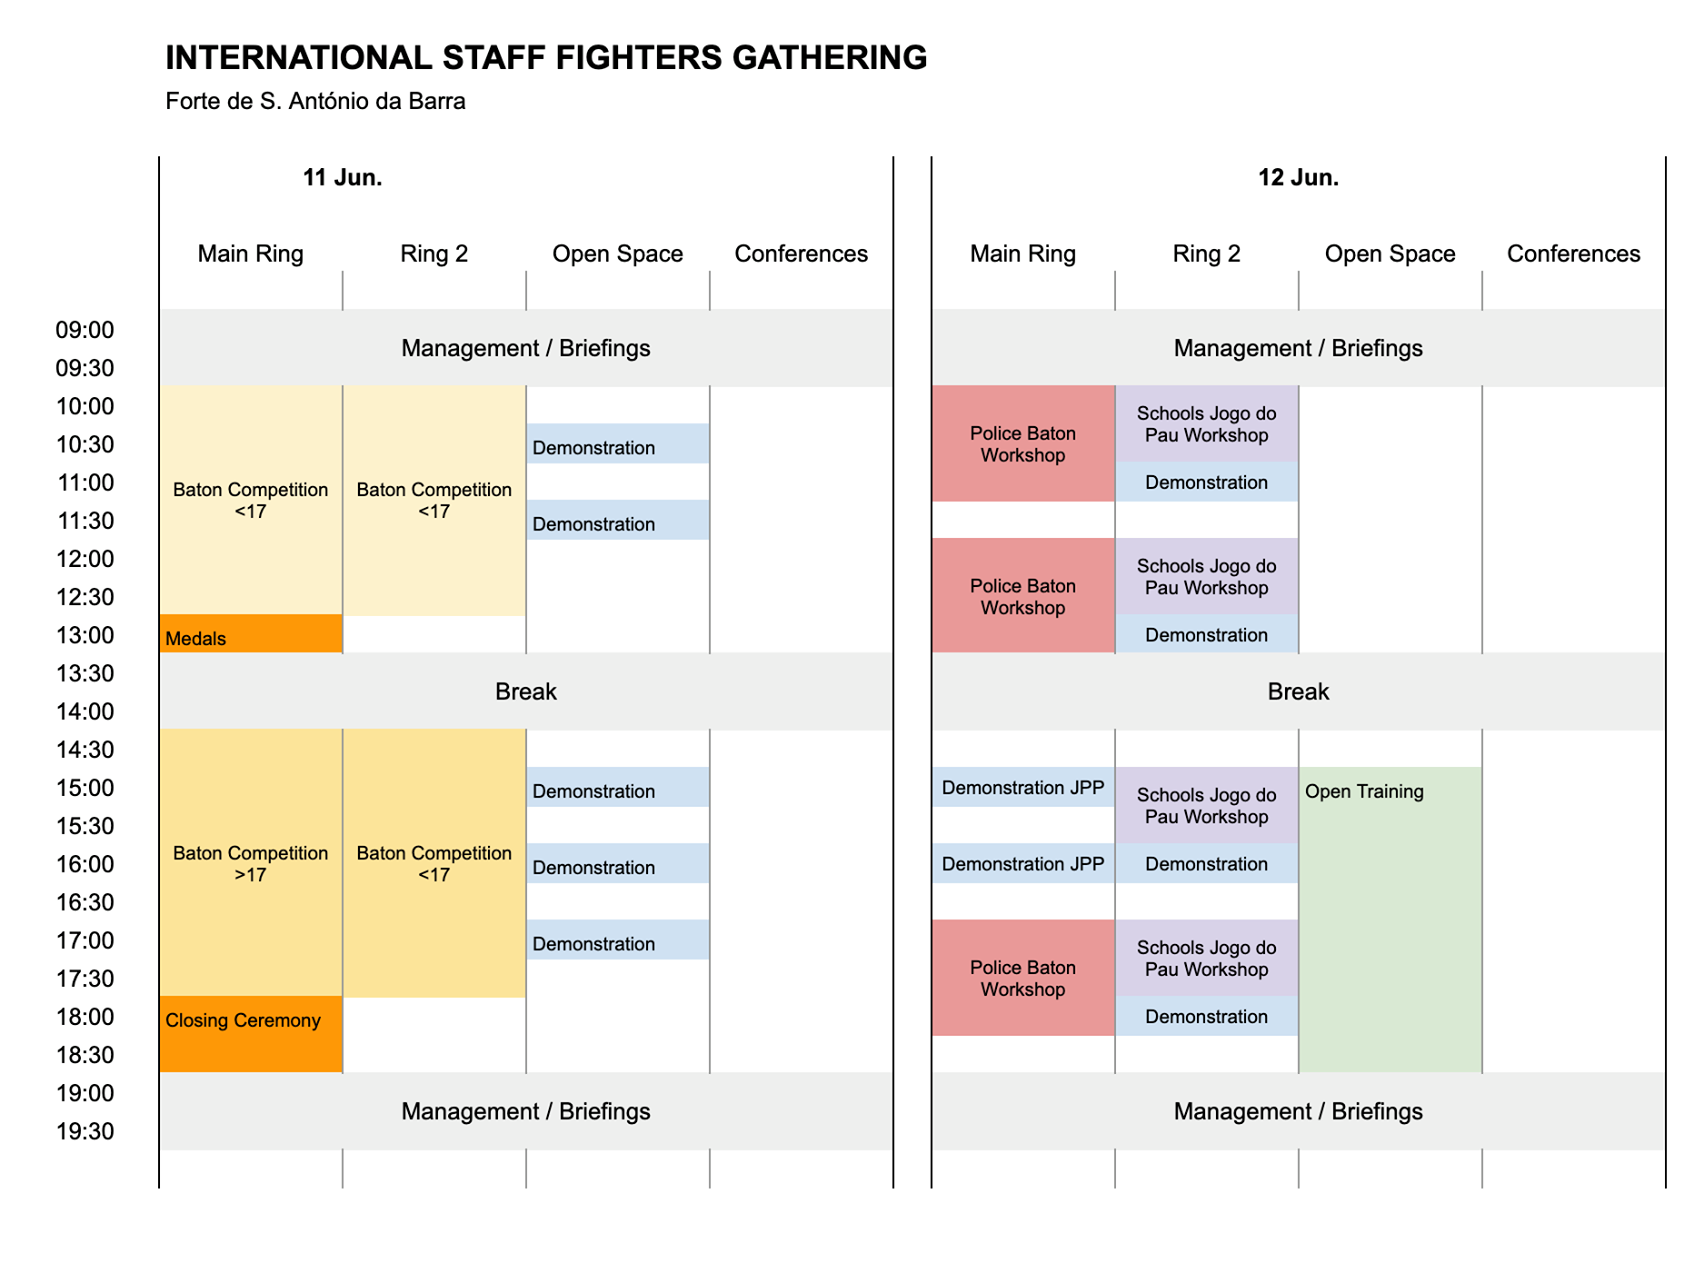 Stafffighters Gathering initial calendar, for the fist 2 days of the event